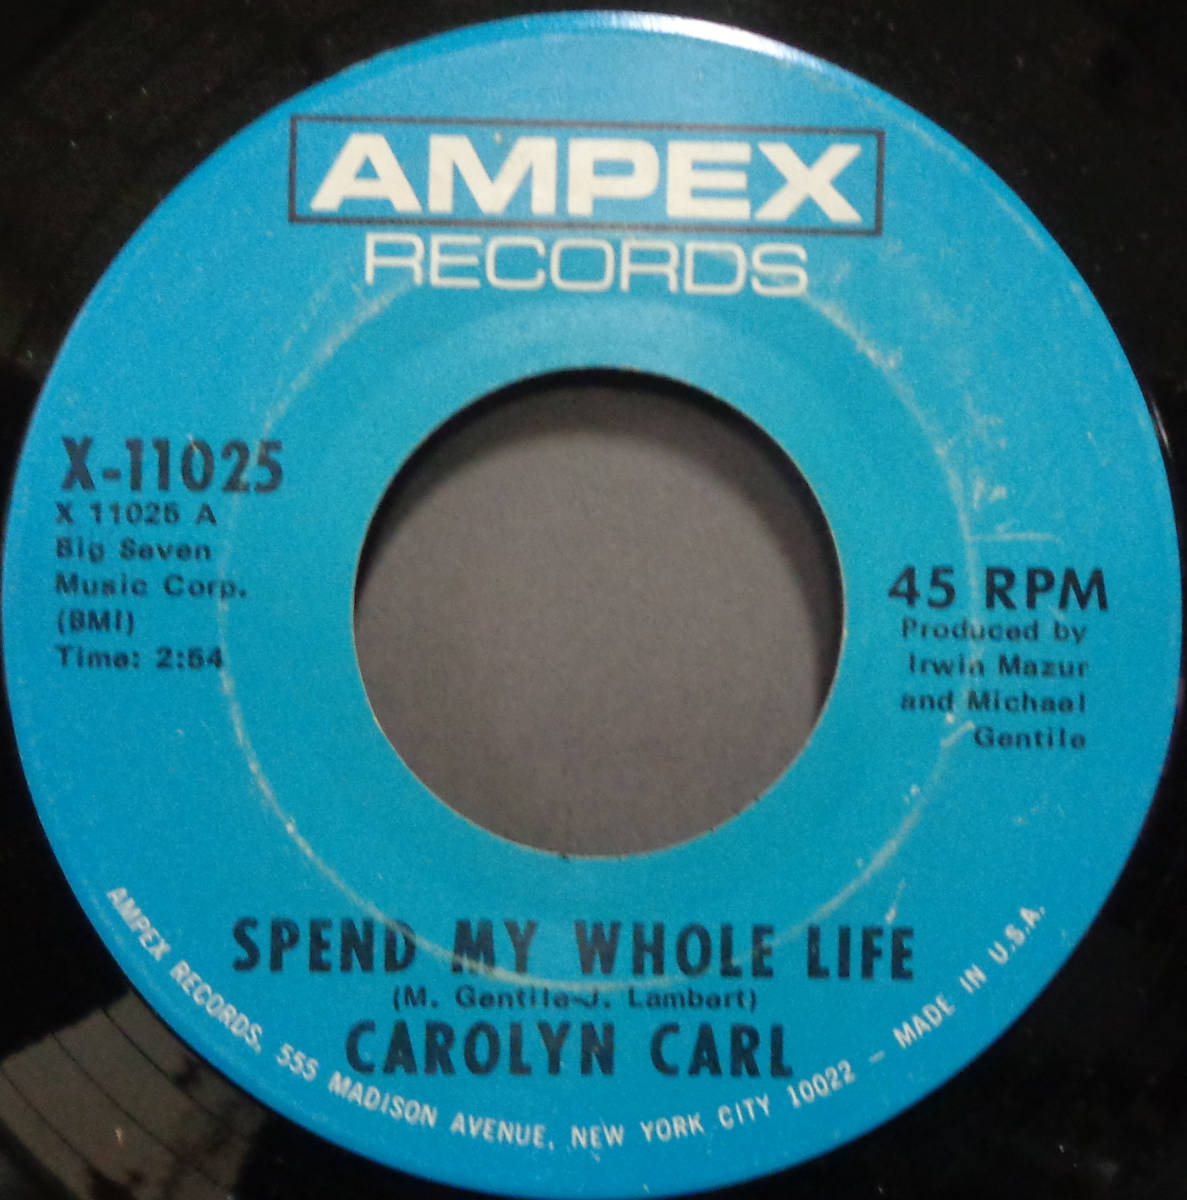 【SOUL 45】CAROLYN CARL - SPEND MY WHOLE LIFE / WHAT COULD BE WORSE (s231109016)_画像1